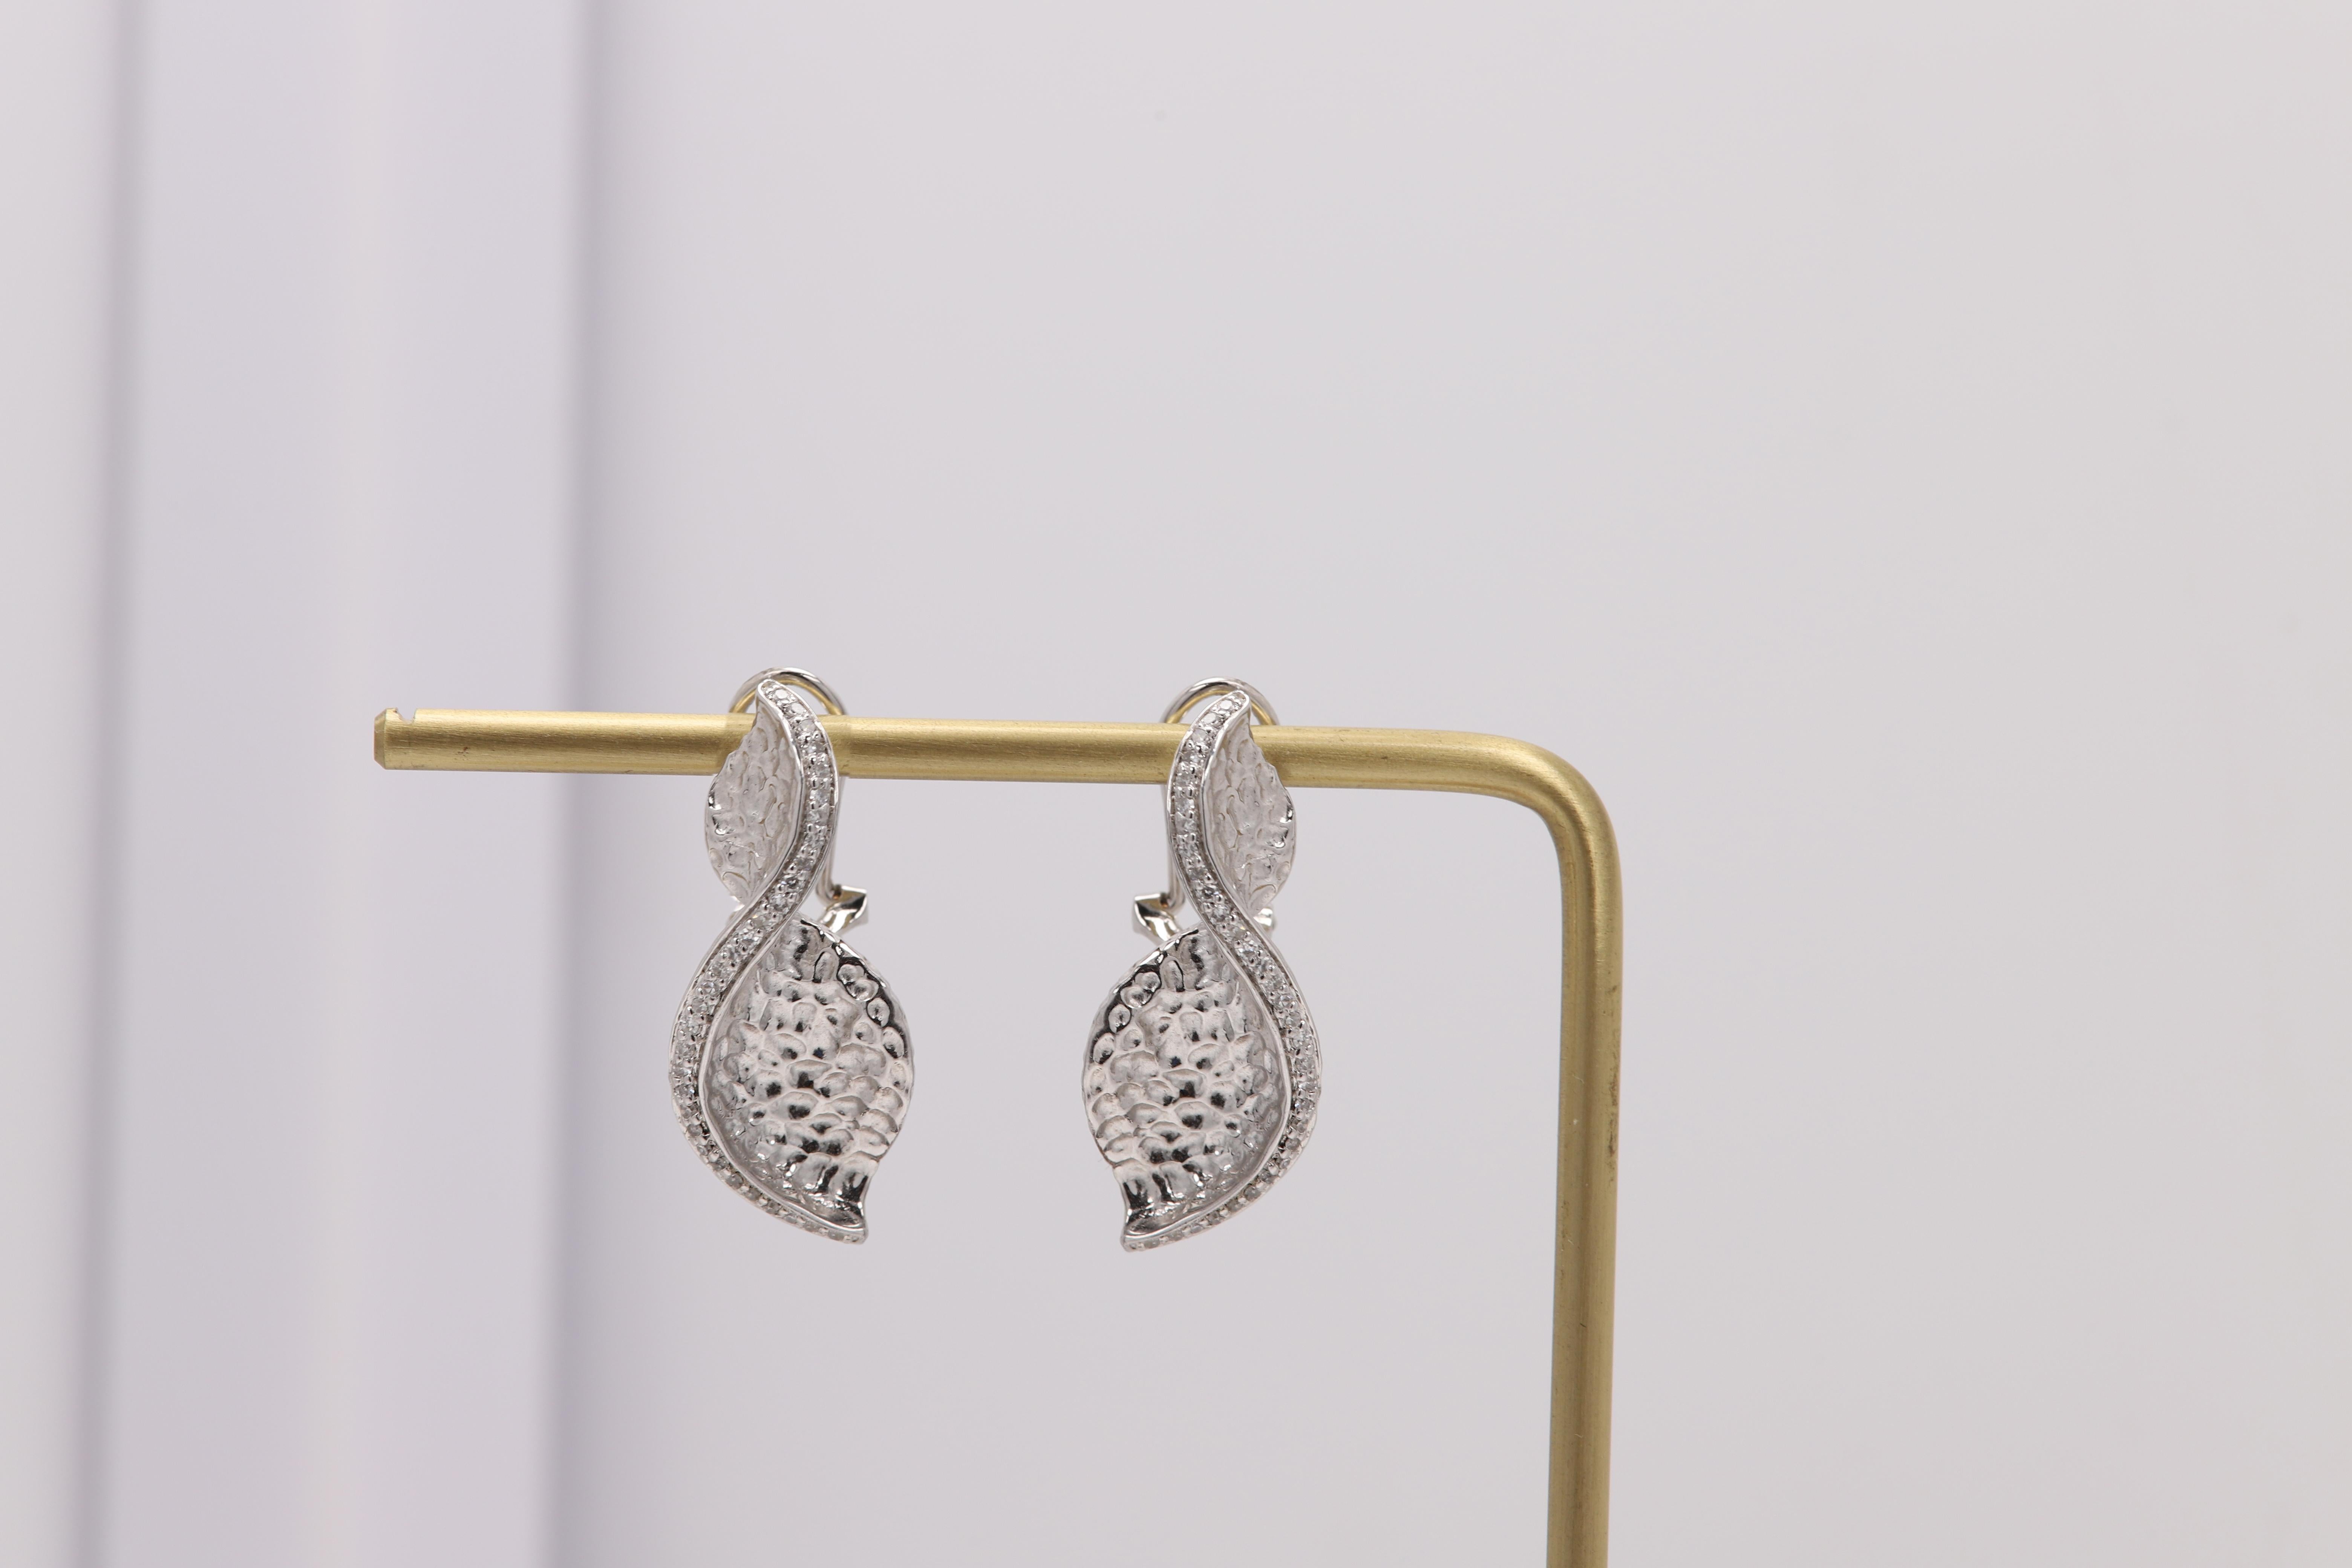 Sterling Silver 925 Textured Earrings
with Natural Diamonds
Twisted Style Design with Hammered Texture
Diamonds approx 0.27 carat H-SI
Weight  6.0 grams
Size approx 1' Inch ( 28mm)300
Omega Backs
(oro se12782-50)